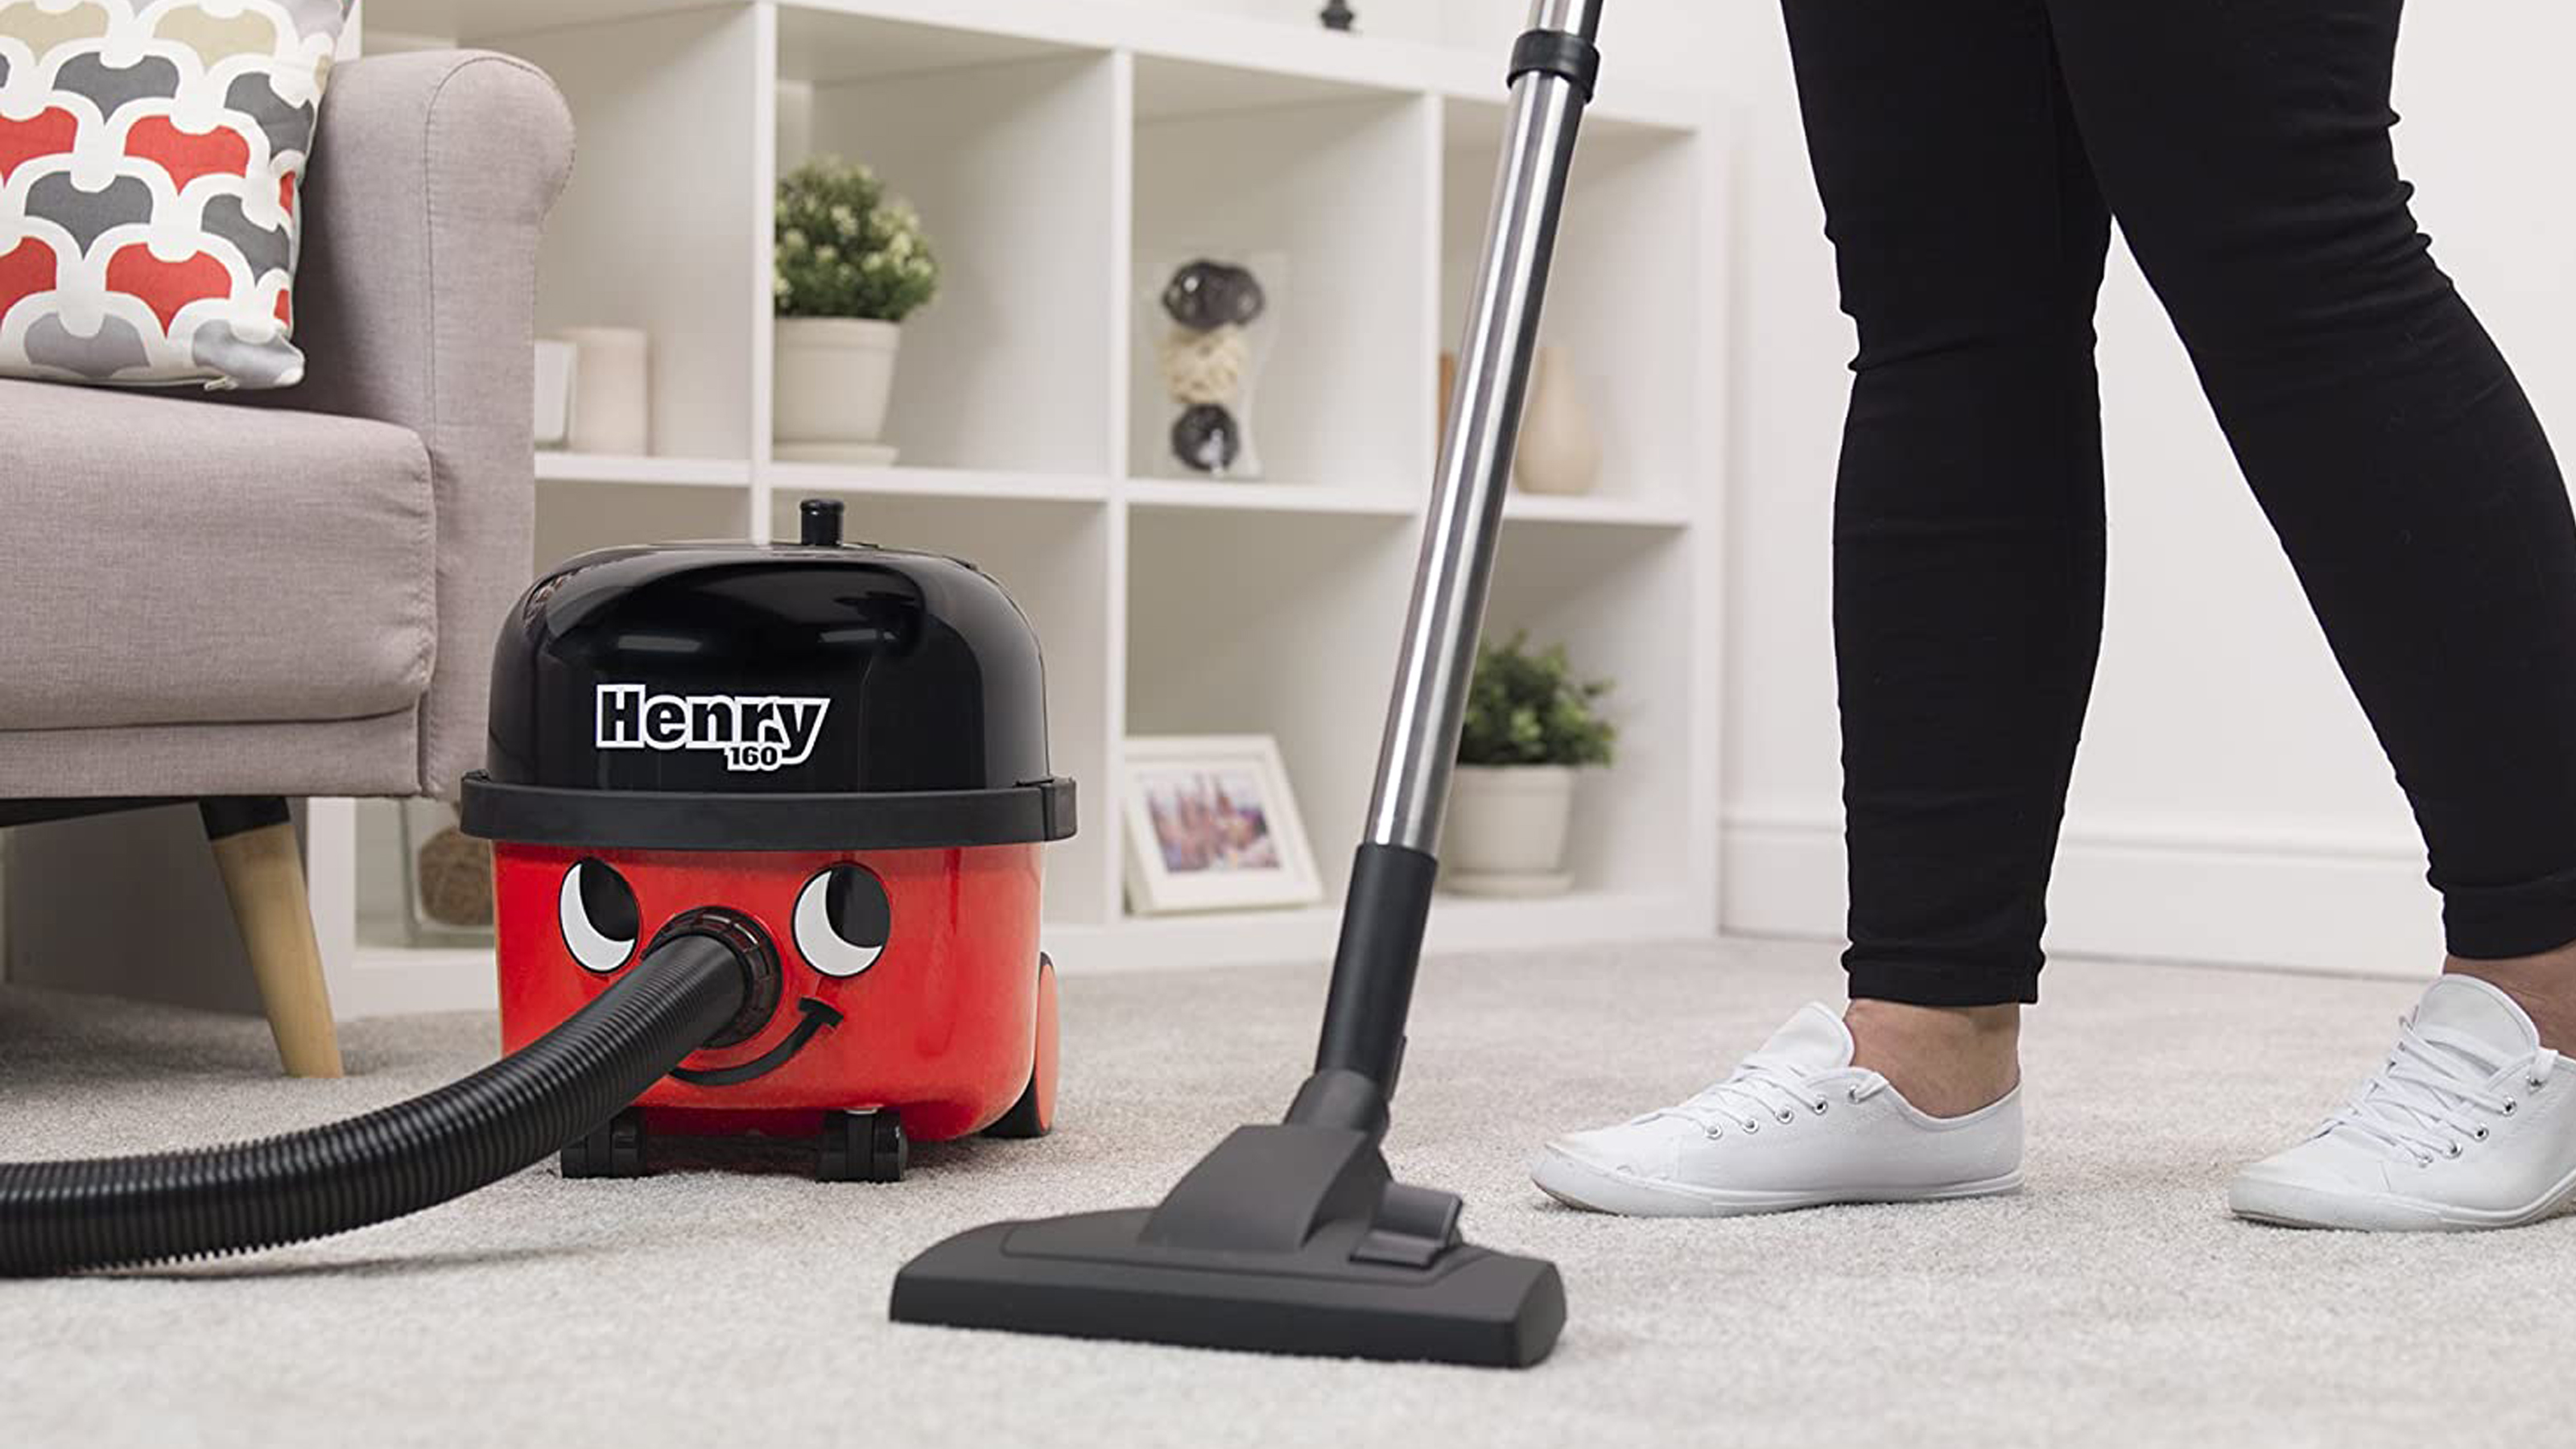 Buy NUMATIC Henry Xtra HVX200 Cylinder Vacuum Cleaner - Red | Currys